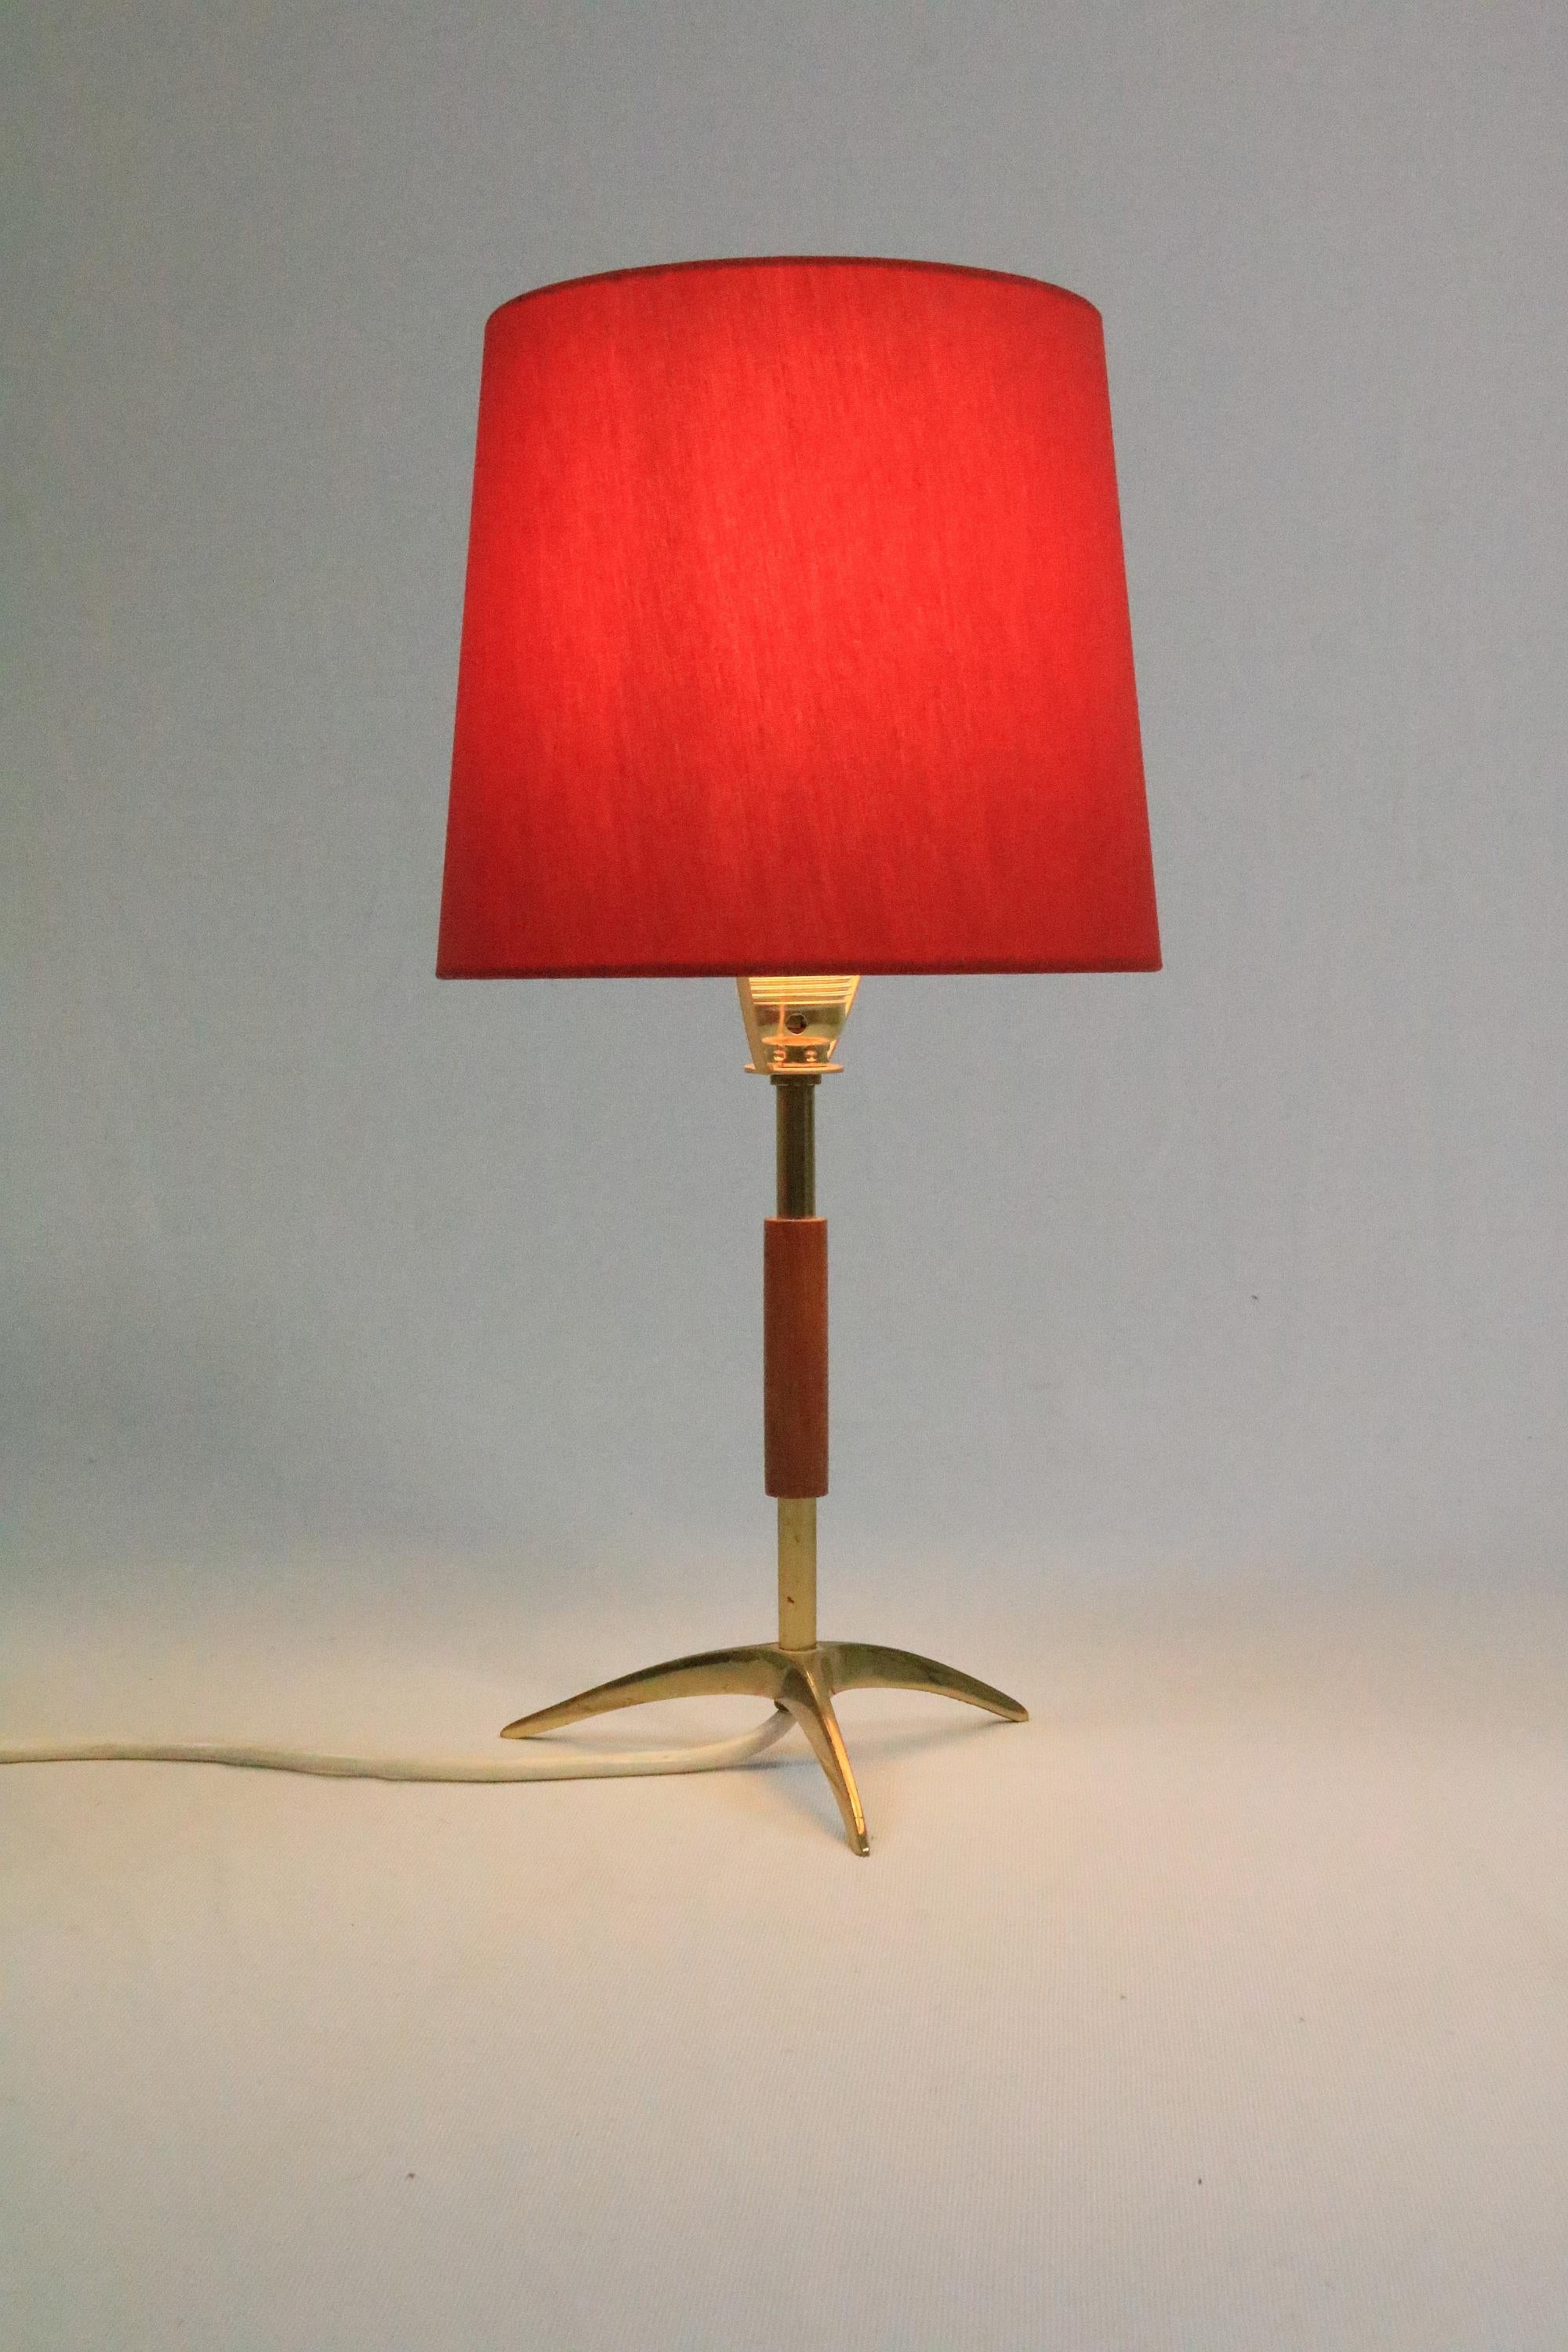 A very rare and beautiful table lamp  with teak and brass elements and crow's foot.
By Kalmar, Austria
Makes a wonderful light when on!

New professionally made lampshade in very harmonious matching red.
New brass socket, which is much more in